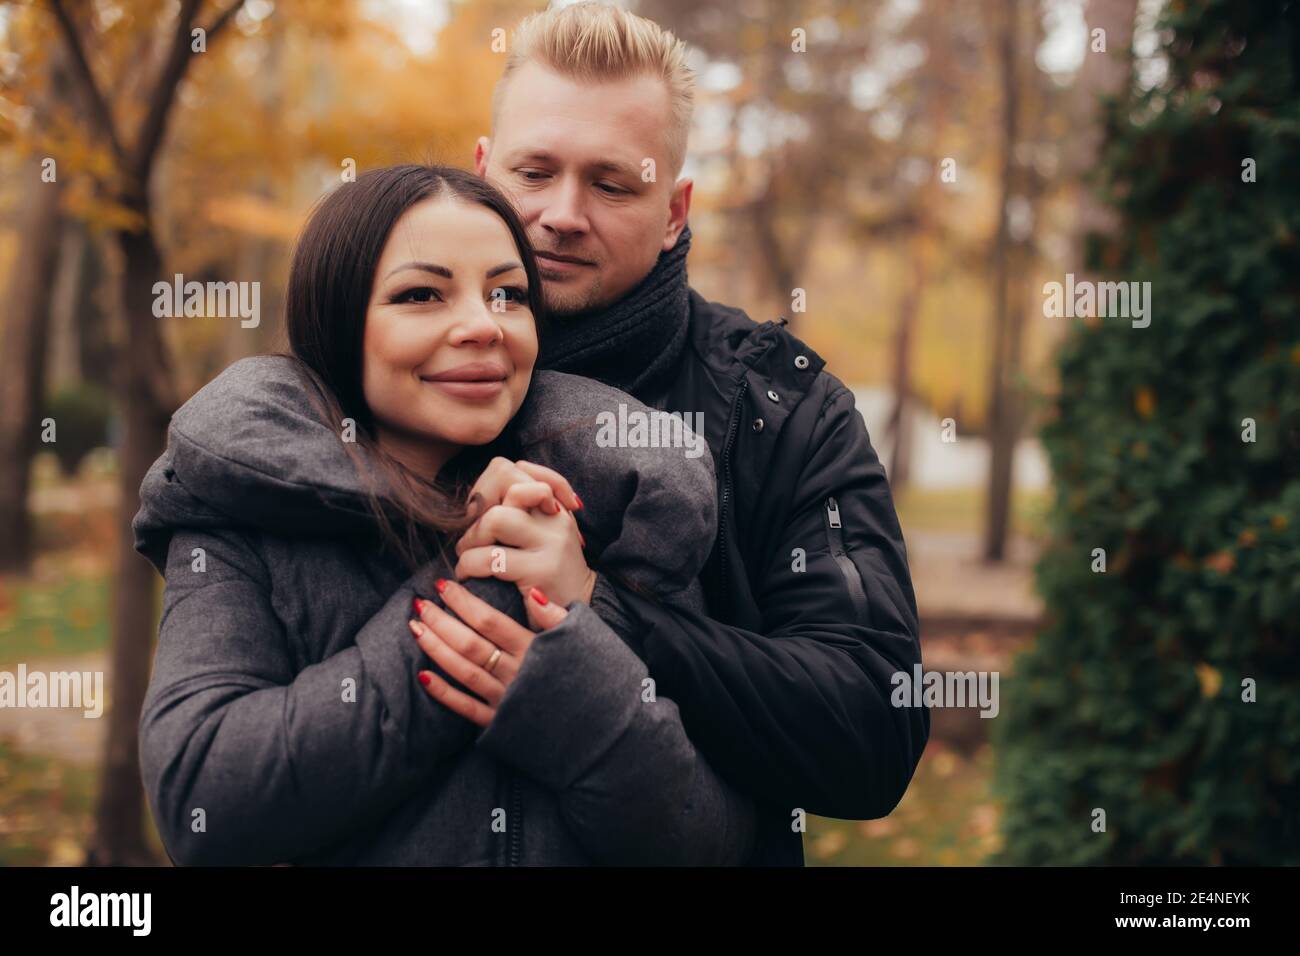 A man hugs and holds the hand of his girlfriend as she smiles in the cold weather in the autumn park. High quality photo Stock Photo